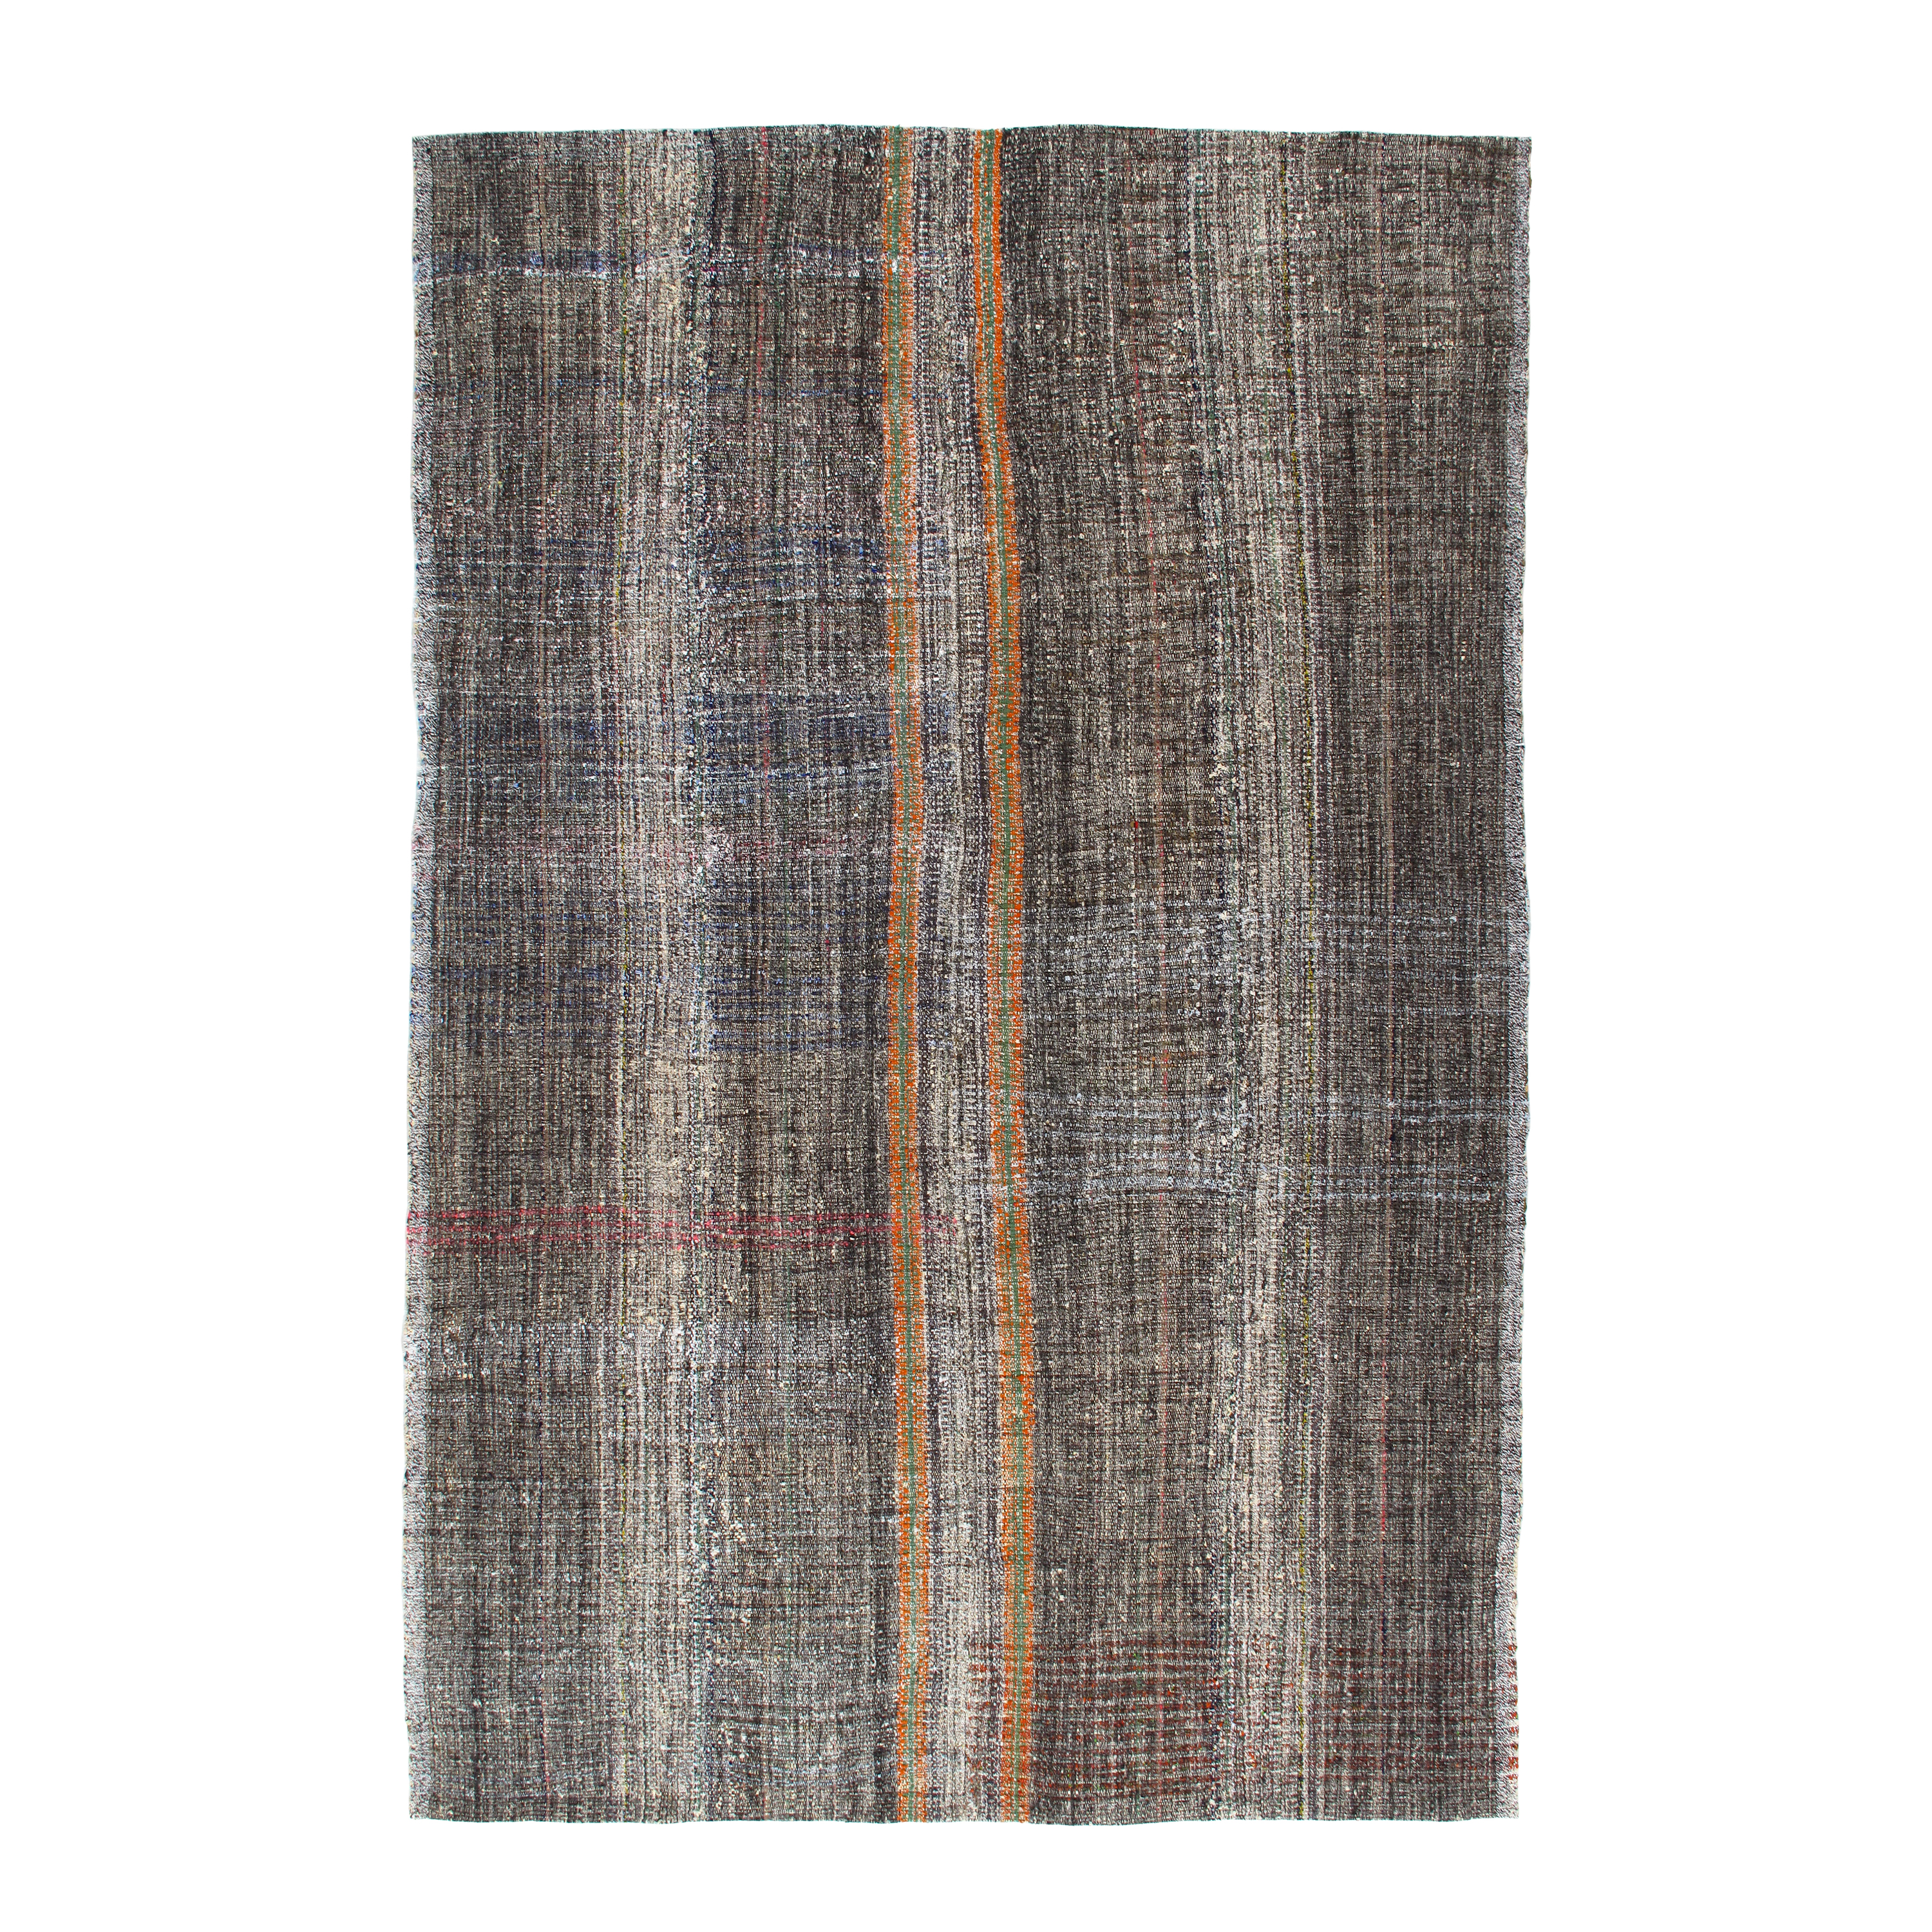 This Vintage flatweave is possess the quality and versatility that stand the test of time.